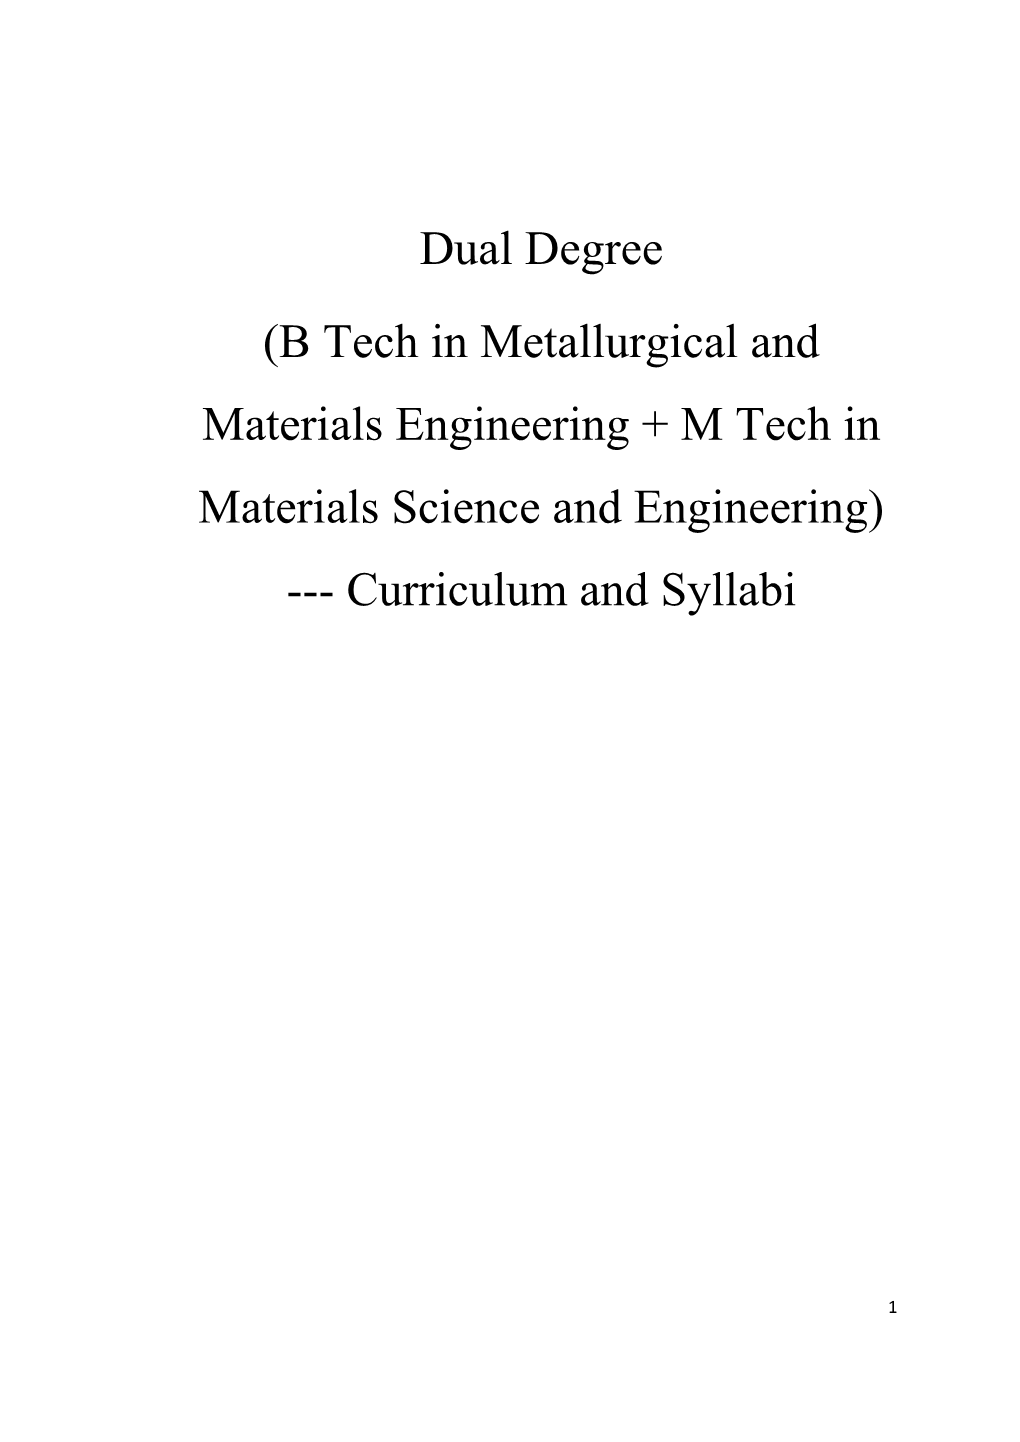 Dual Degree (B Tech in Metallurgical and Materials Engineering + M Tech in Materials Science and Engineering) --- Curriculum and Syllabi